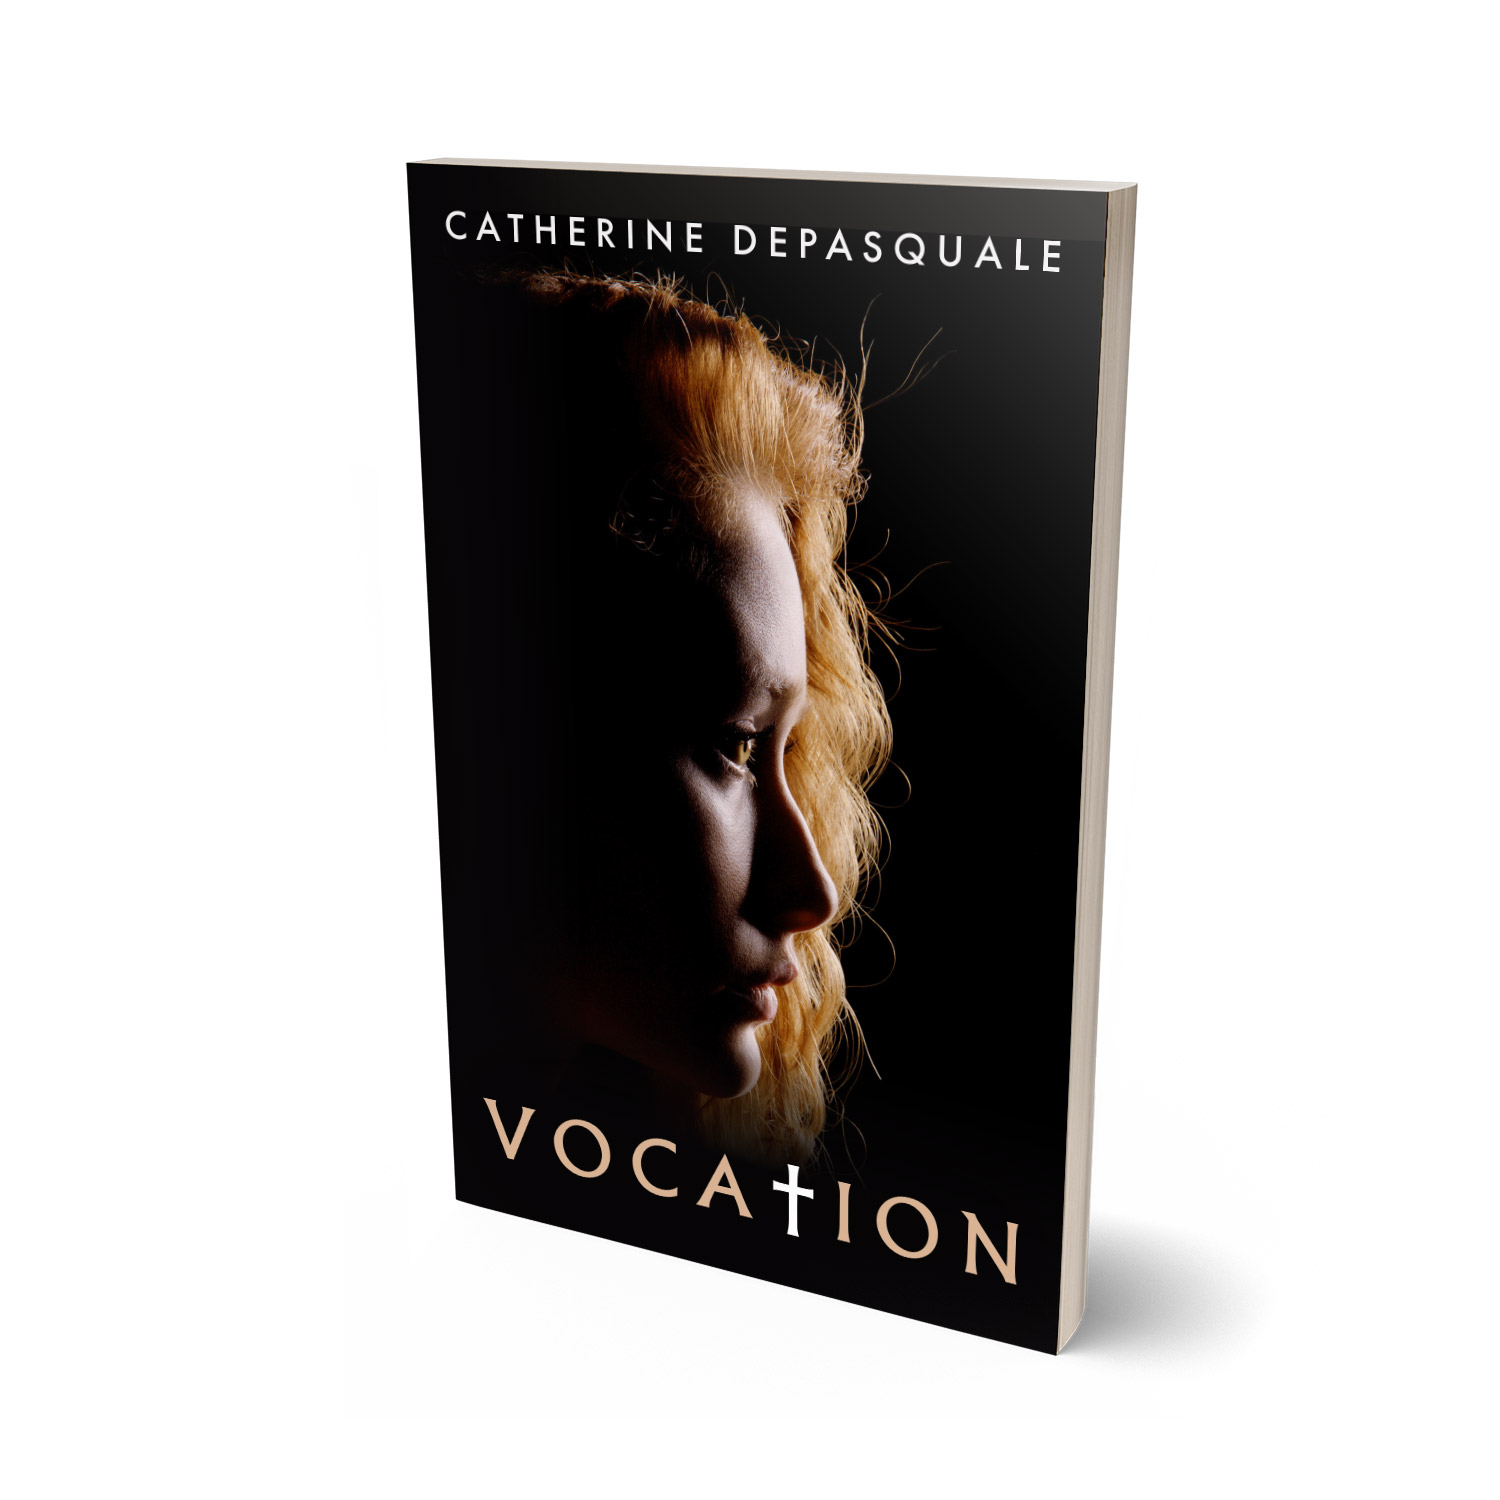 'Vocation' is a great faith-focussed modern novel. The author is Catherine DePasquale. The book cover design and interior formatting are by Mark Thomas. To learn more about what Mark could do for your book, please visit coverness.com.